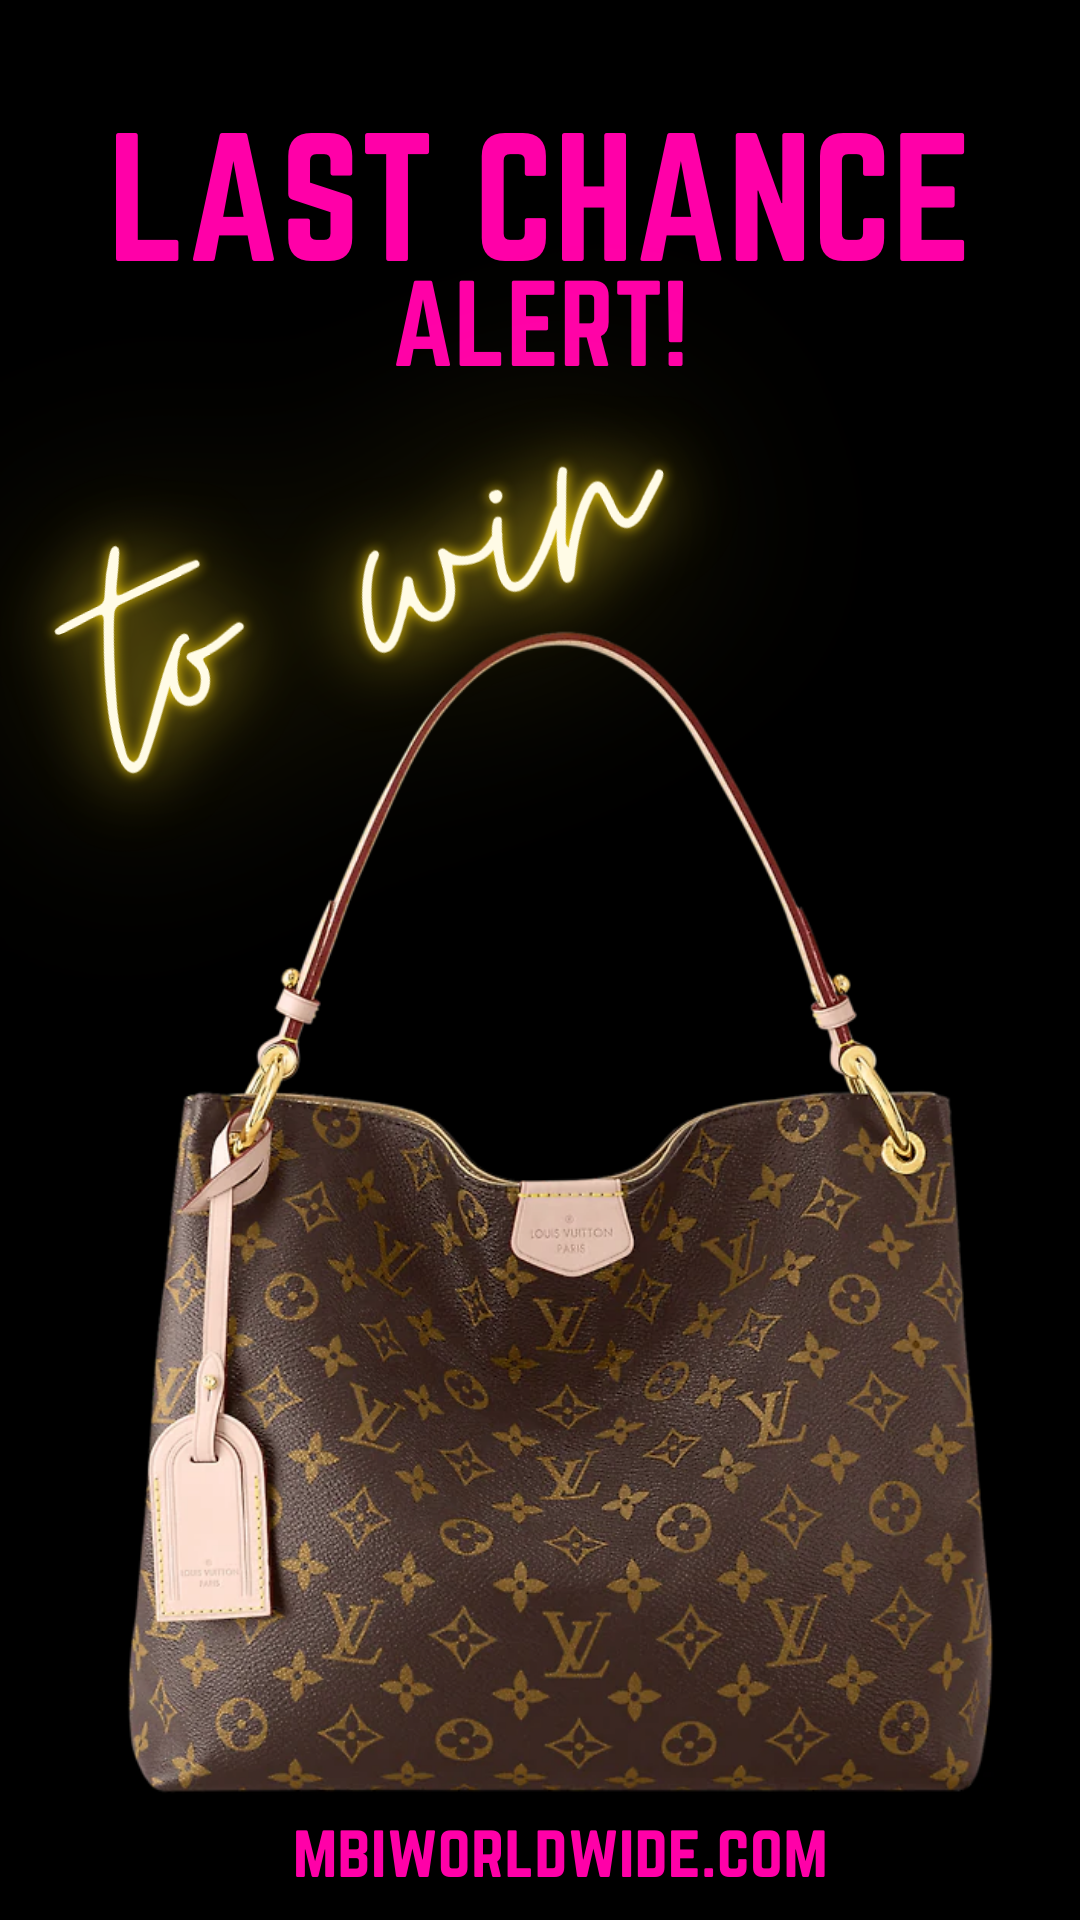 Absolutely! ðŸ™Œ Donâ€™t miss out on your last chance to win this stunning Loui Vuitton from MBI Worldwide Background Checks and Drug Screening! ðŸŽ‰ Swing by booth 112 before 1 pm today and get your name badge scanned during #ASHHRA. Trust us, you donâ€™t want to miss this opportunity! #MBIWorldwide #BackgroundChecks #DrugScreening #LastChance #GiveawayAlert ðŸ’¼